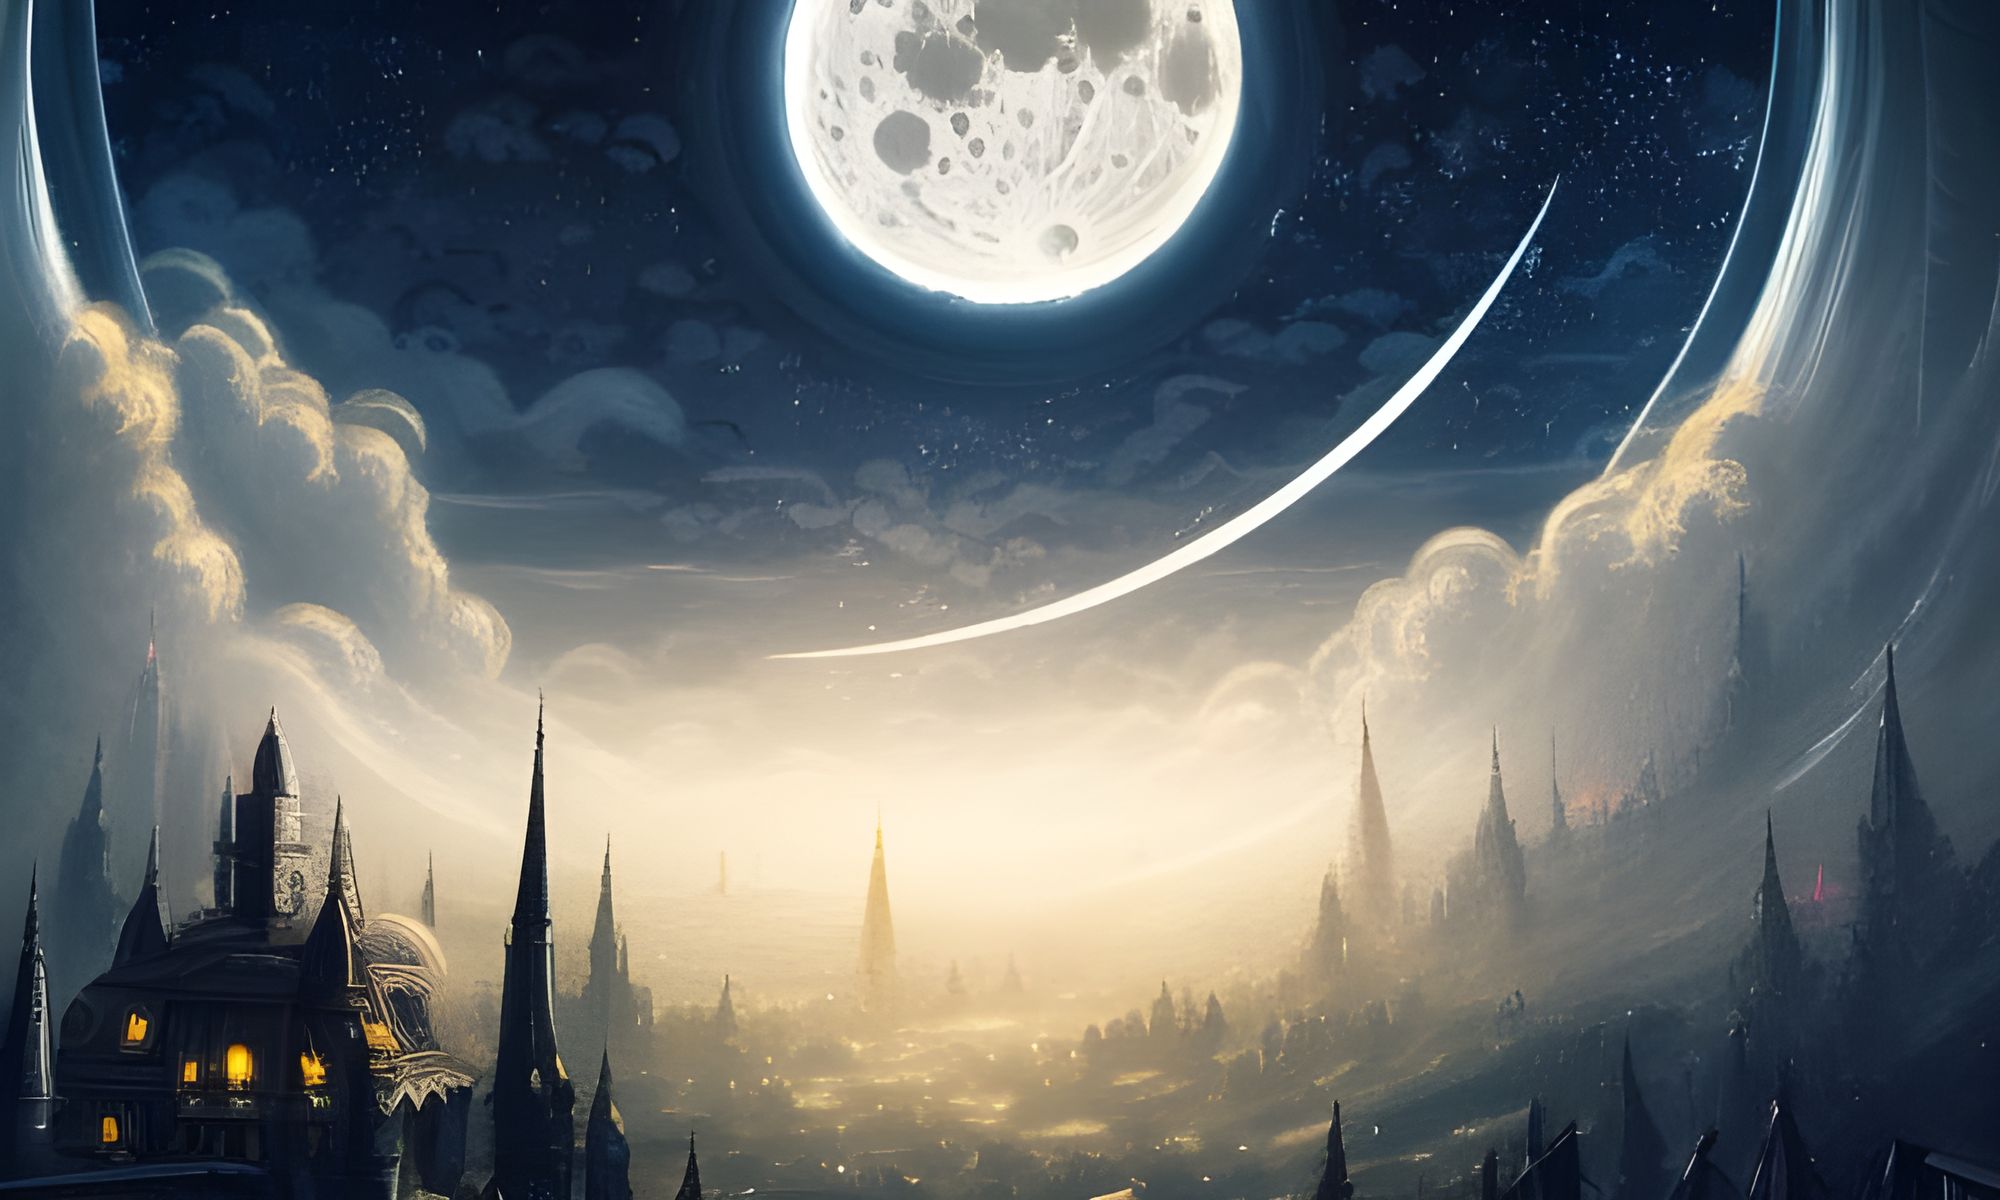 Beautiful anime girl and amazing full moon view 2K wallpaper download